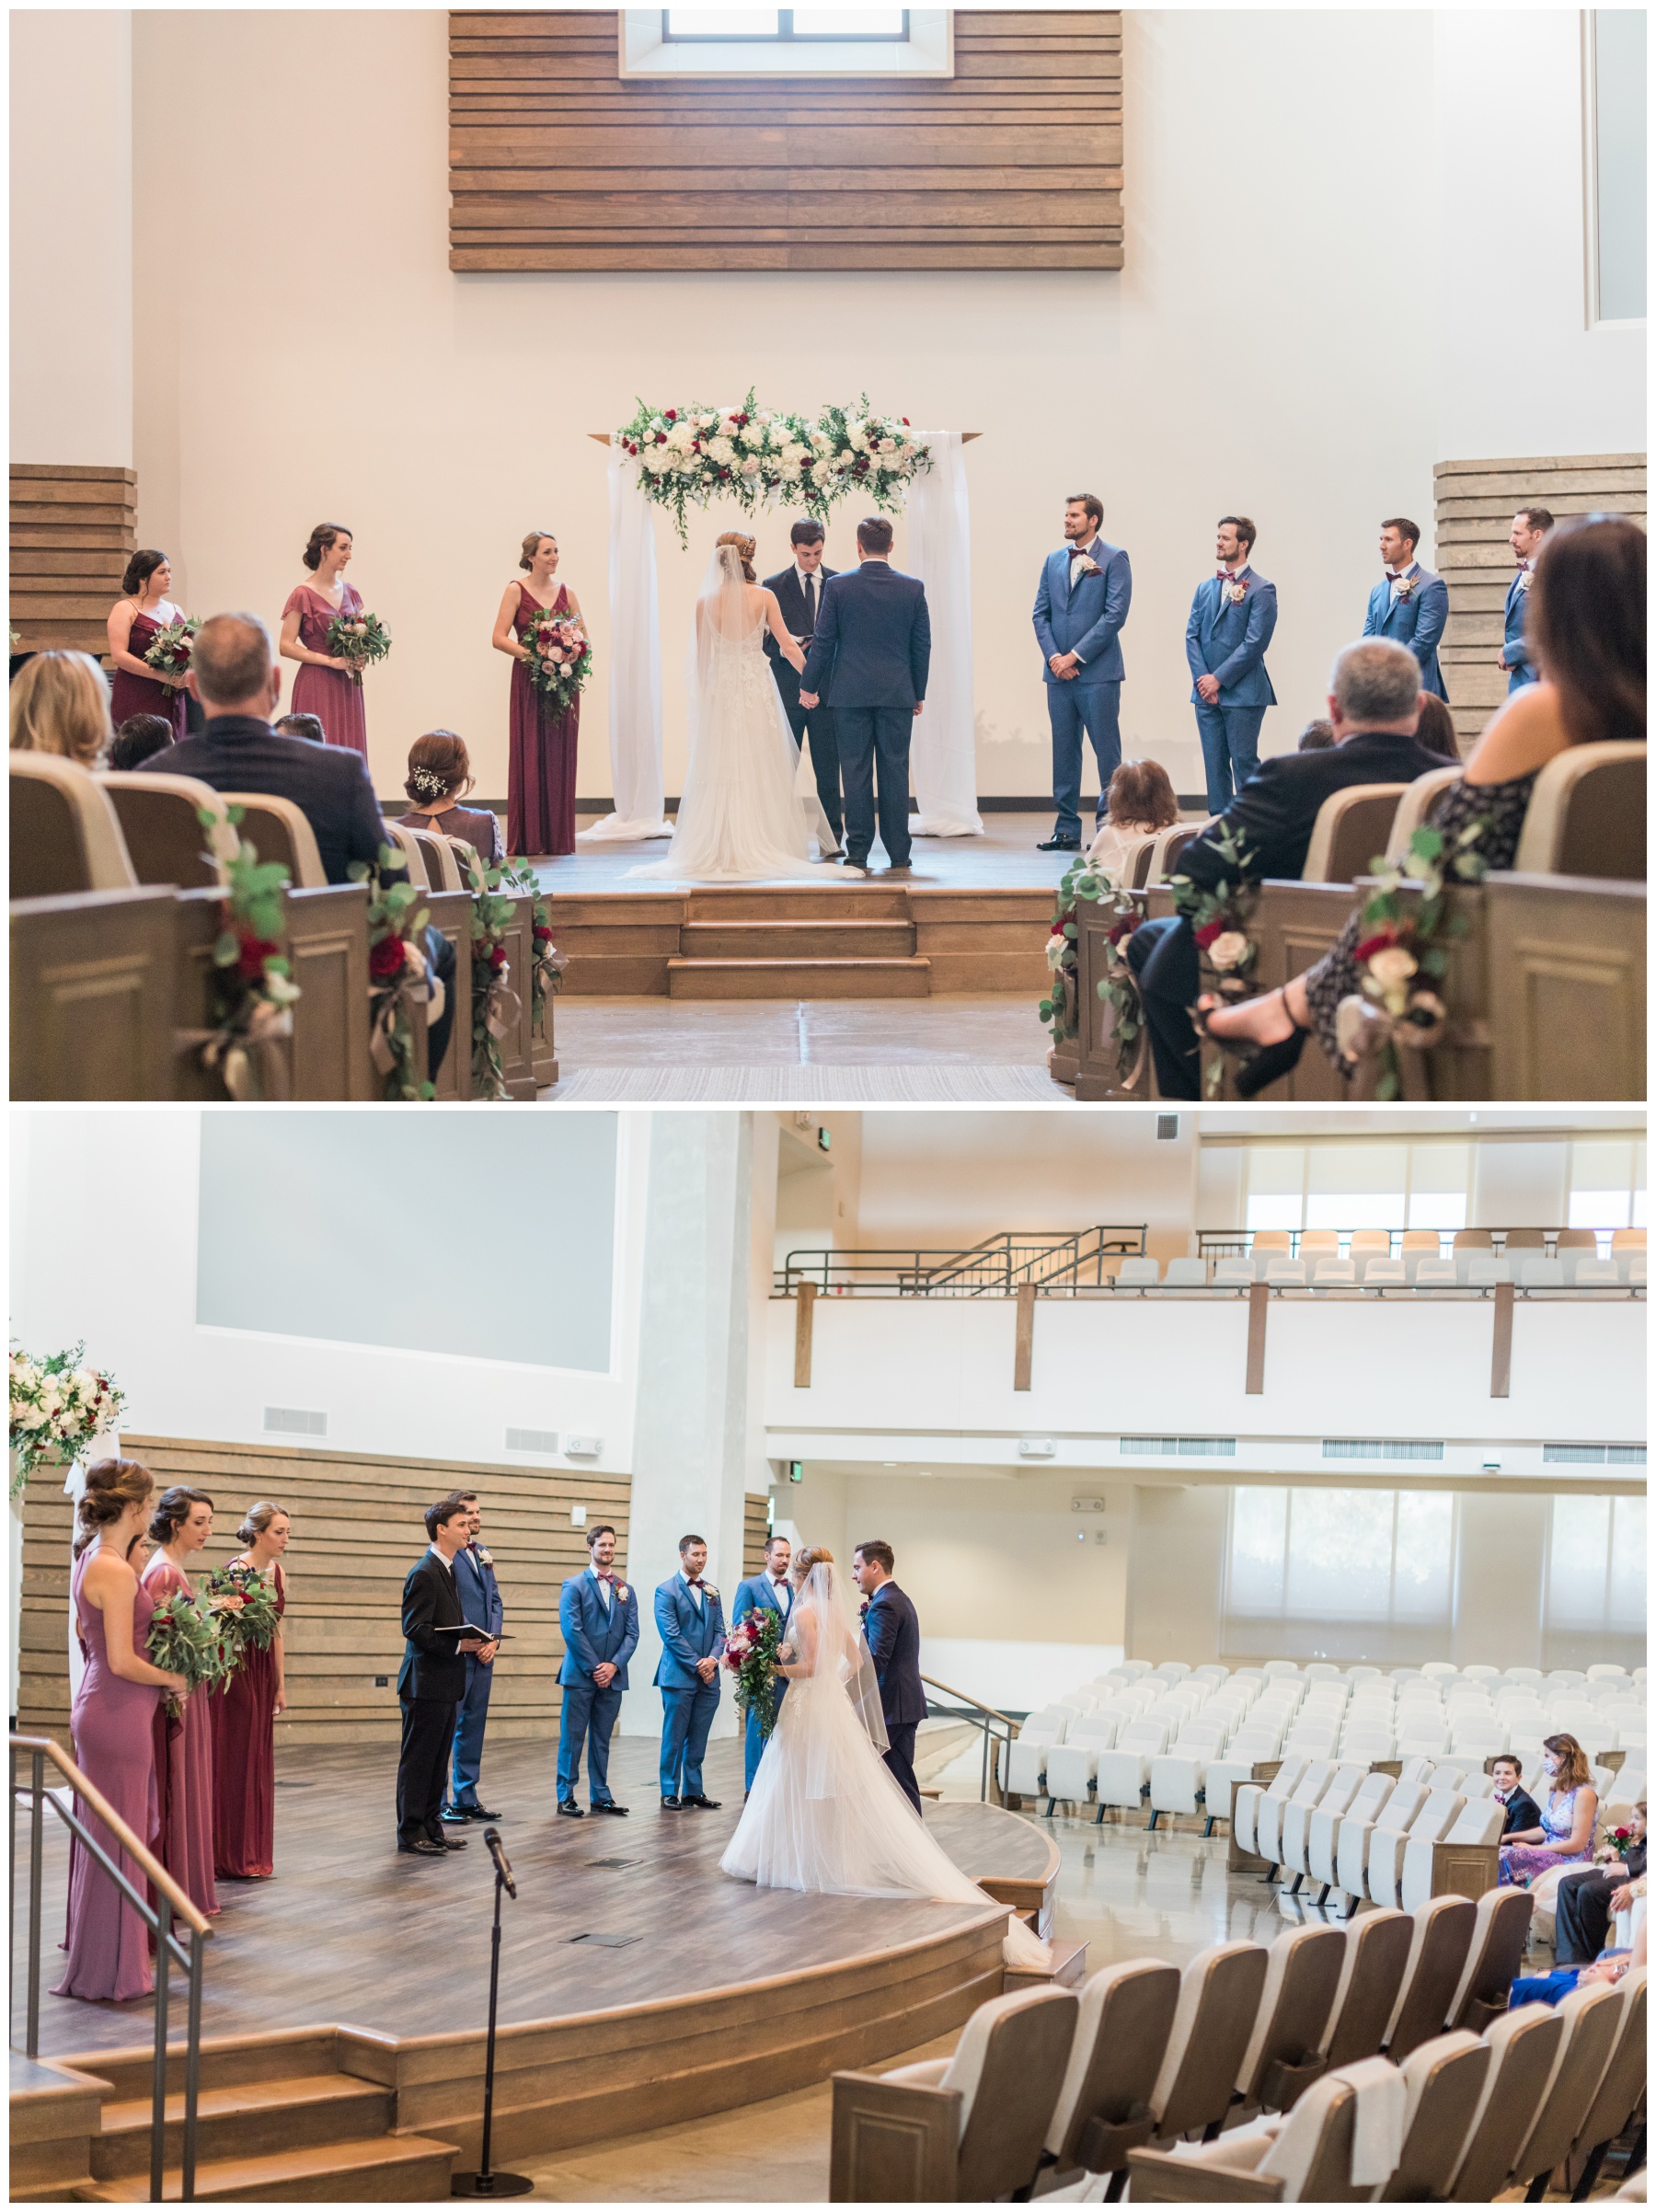 Wedding ceremony at Grace Bible Church in Houston